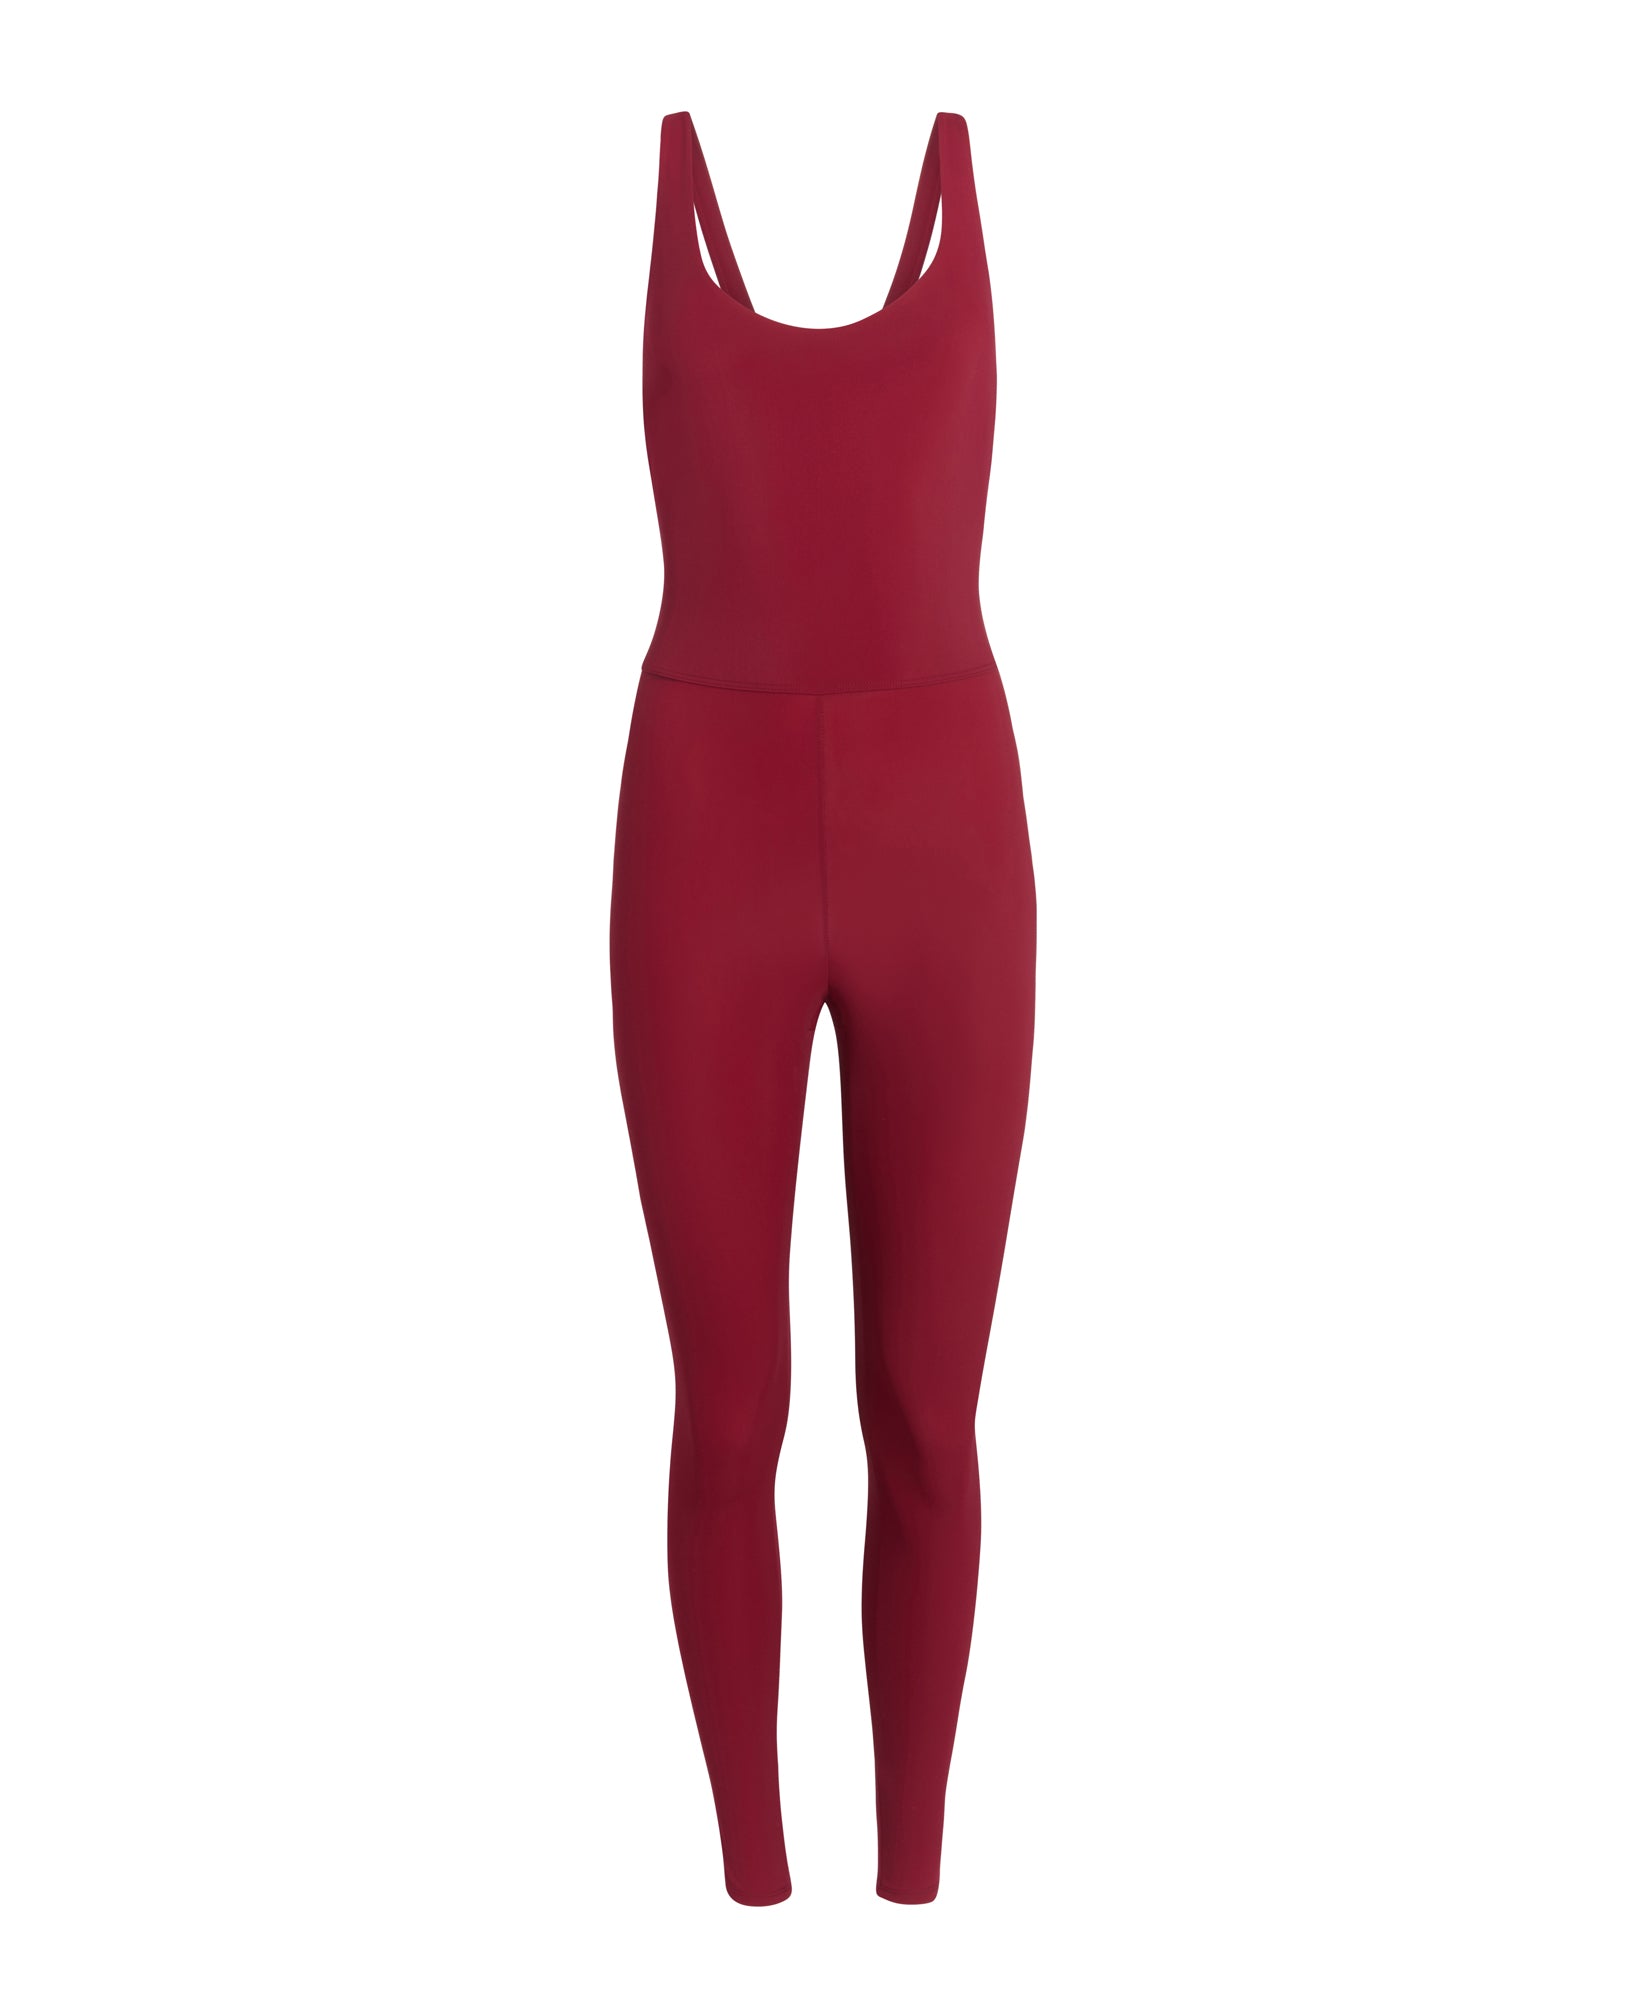 Wear One's At Liberty Unitard in Tango Red on Ghost Mannequin Front